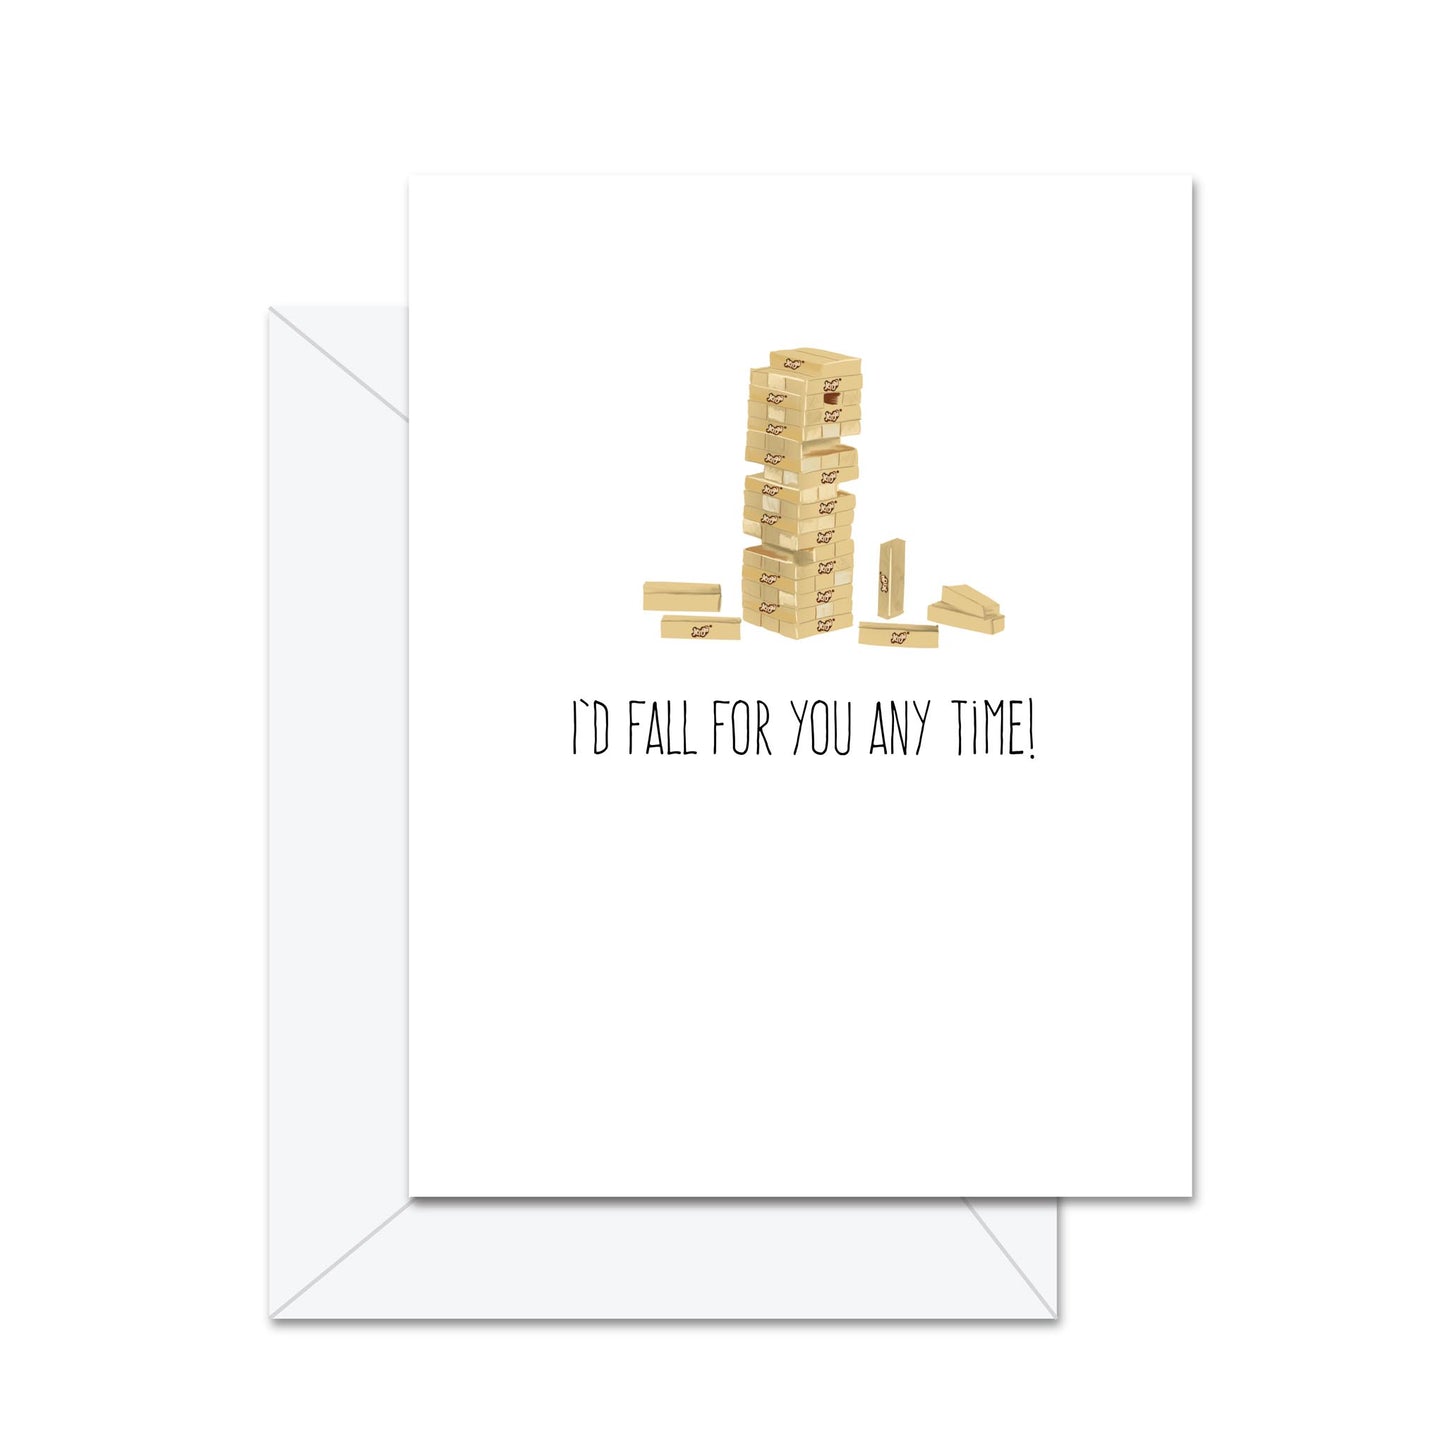 I'd Fall For You Any Time! - Greeting Card